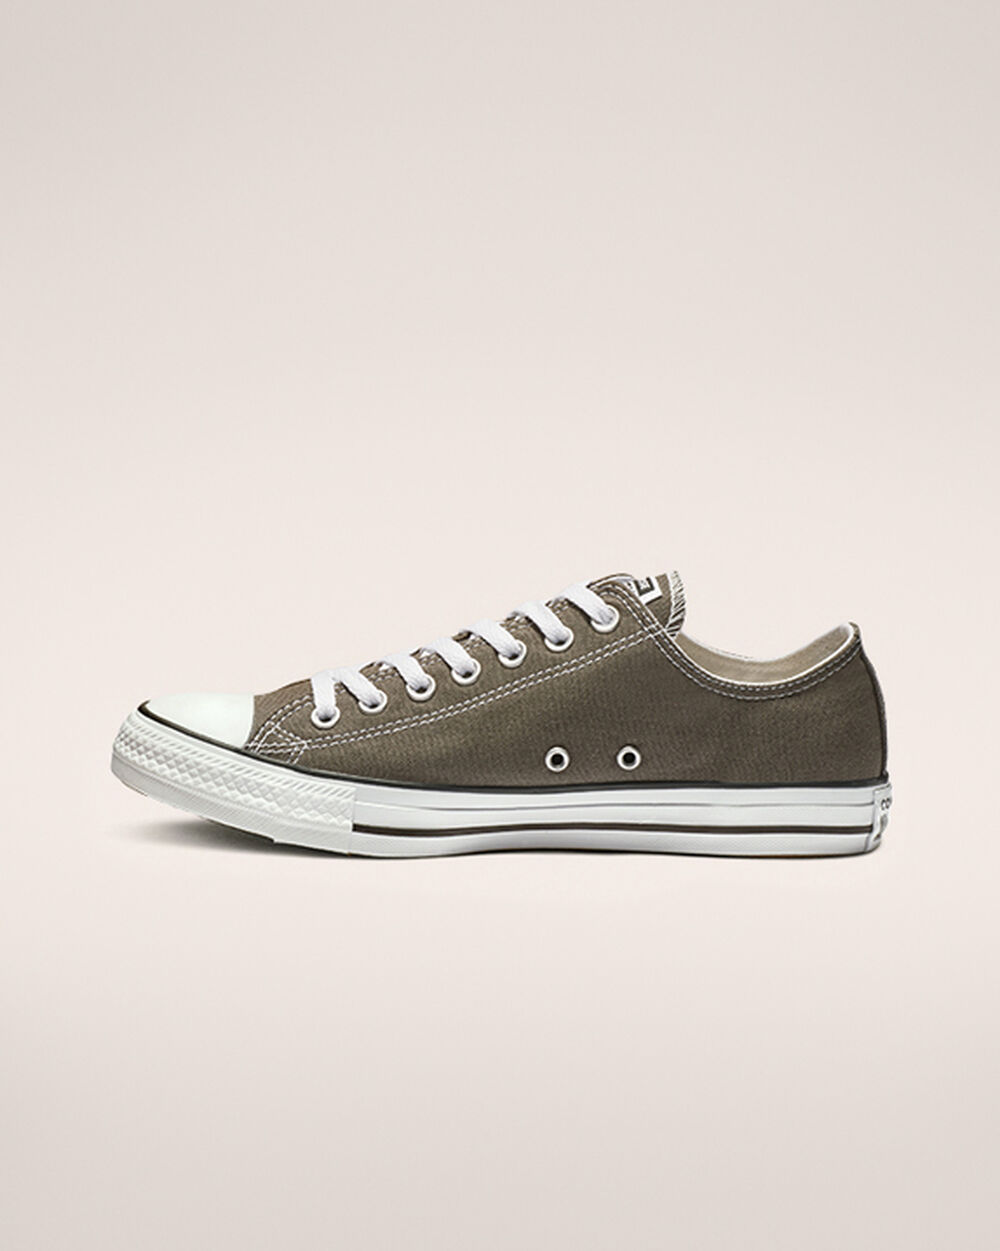 Tenis Converse Chuck Taylor All Star Mujer Grises Oscuro | Mexico-587016